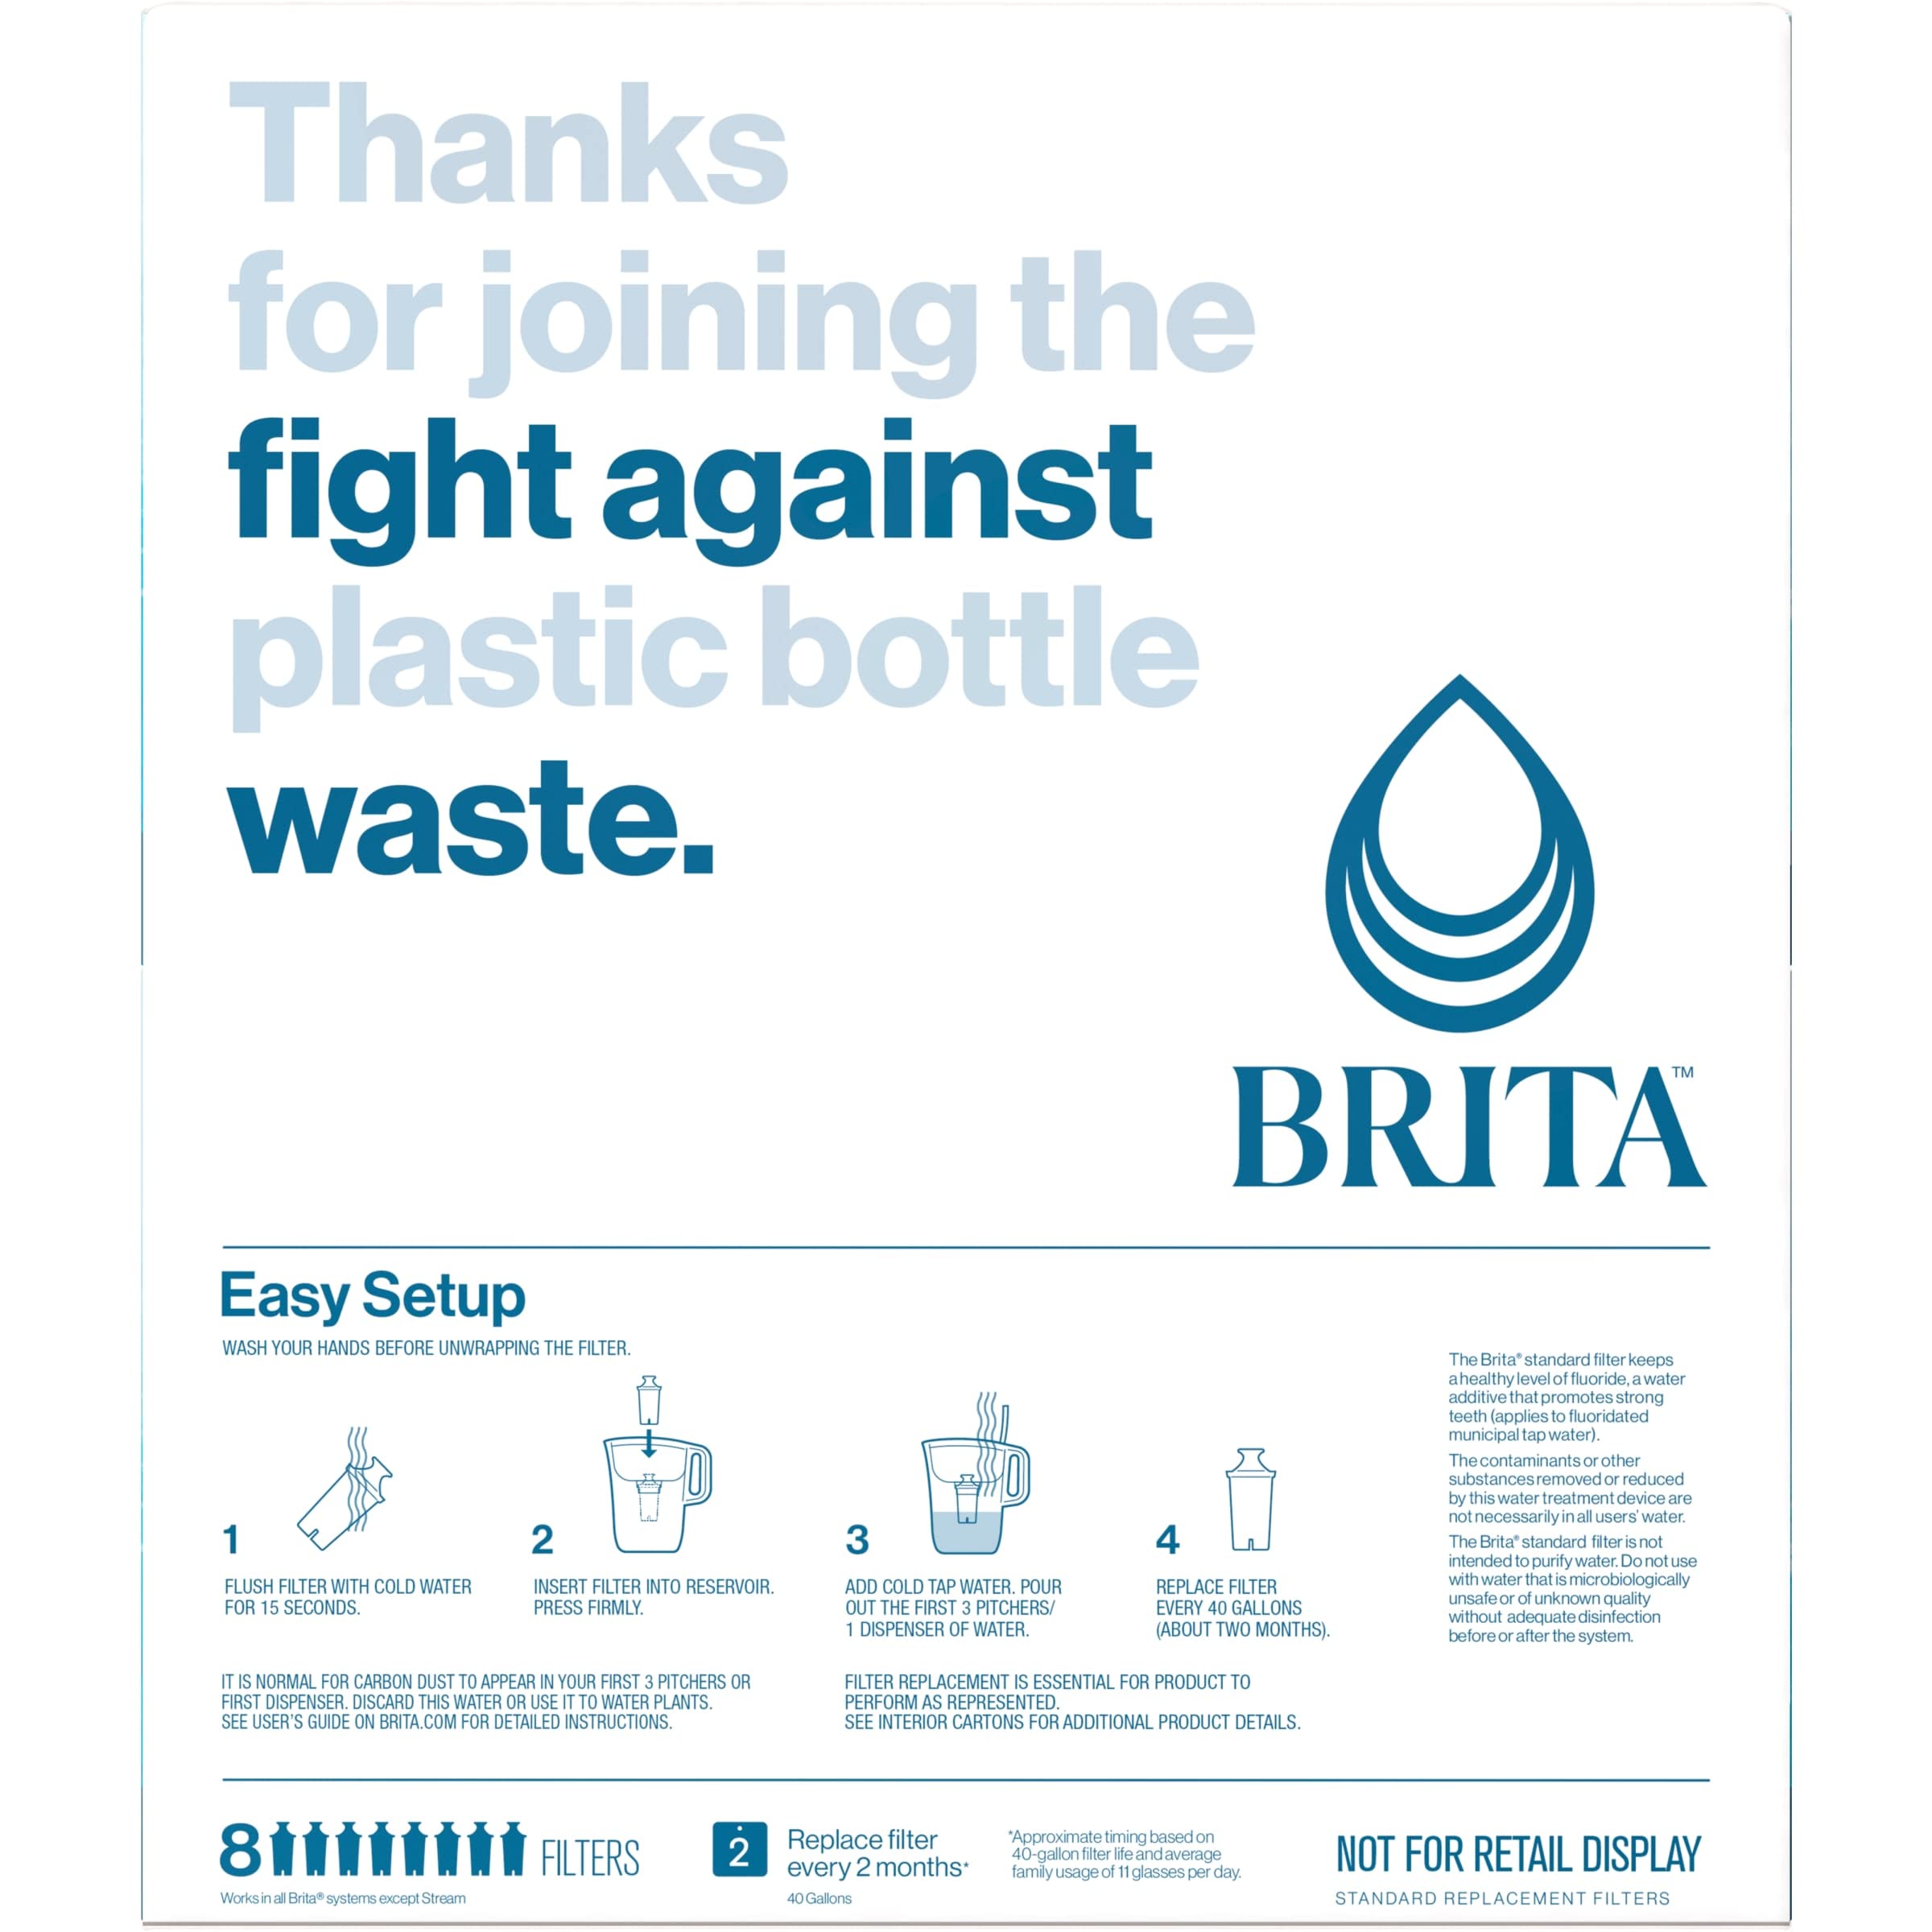 Brita Standard Water Filter Replacements for Pitchers and Dispensers, Lasts 2 Months, Reduces Chlorine Taste and Odor, 8 Count